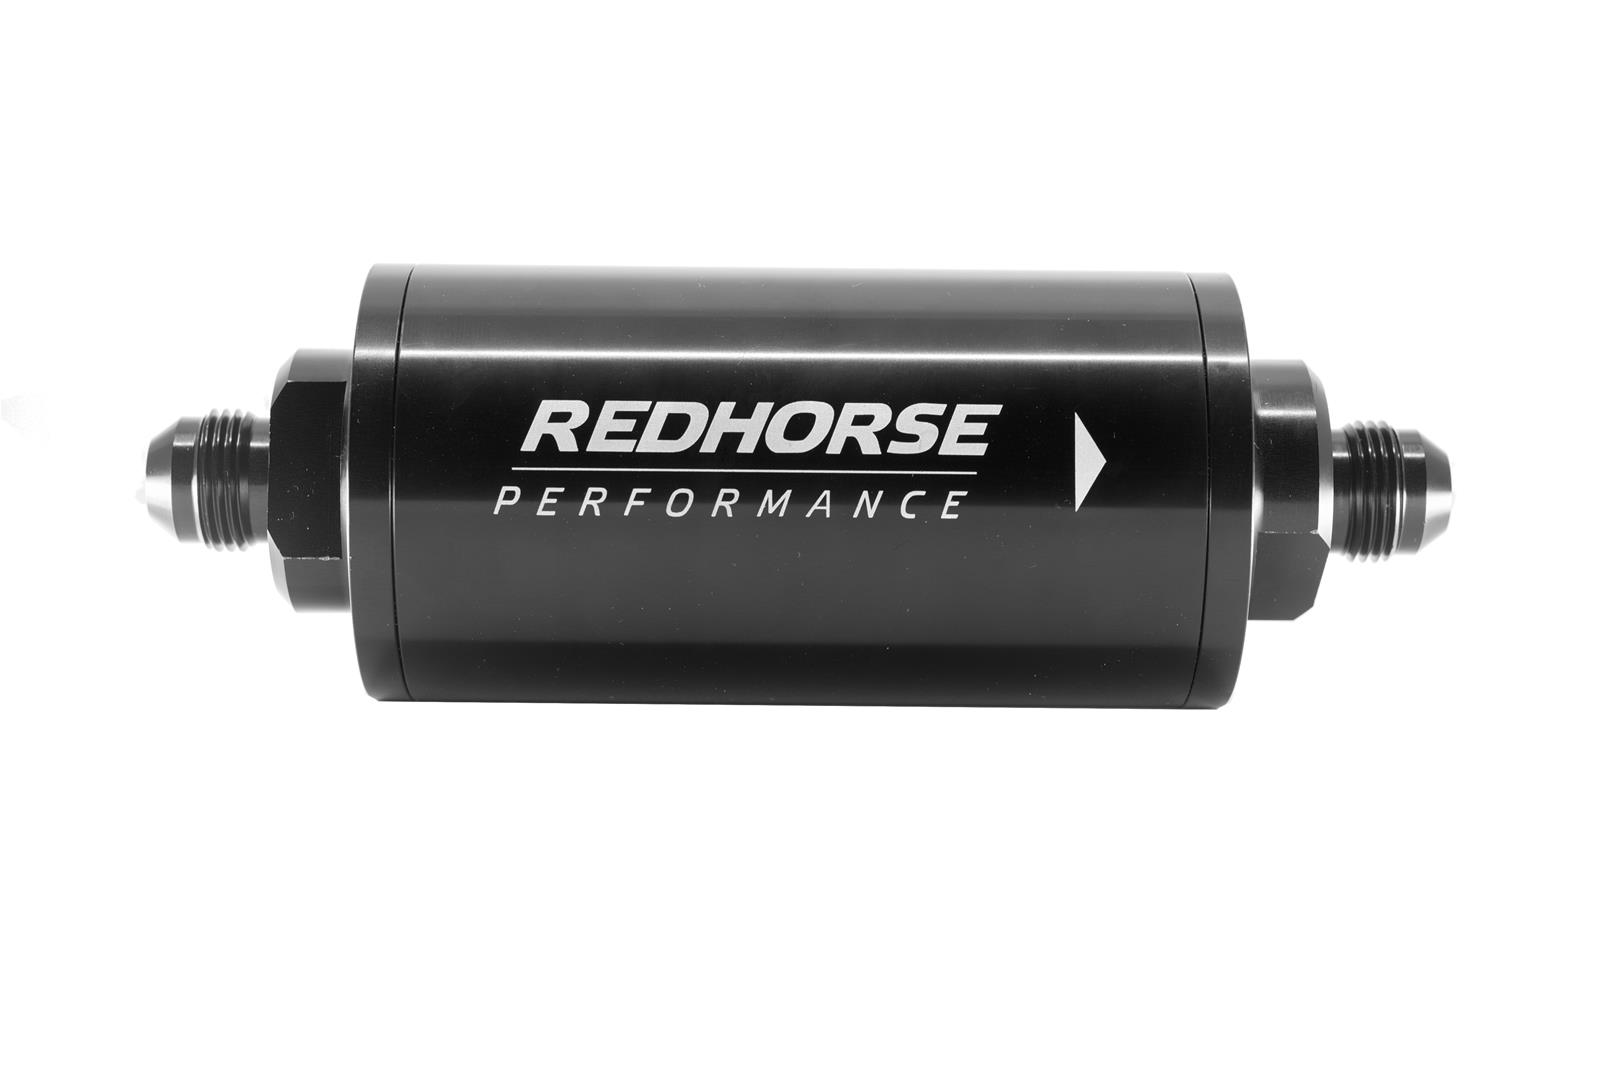 Redhorse Performance 4651-06-2-100 6in Cylindrical In-Line Race Fuel Filter w/ 100 Micron S.S. element - 06 AN